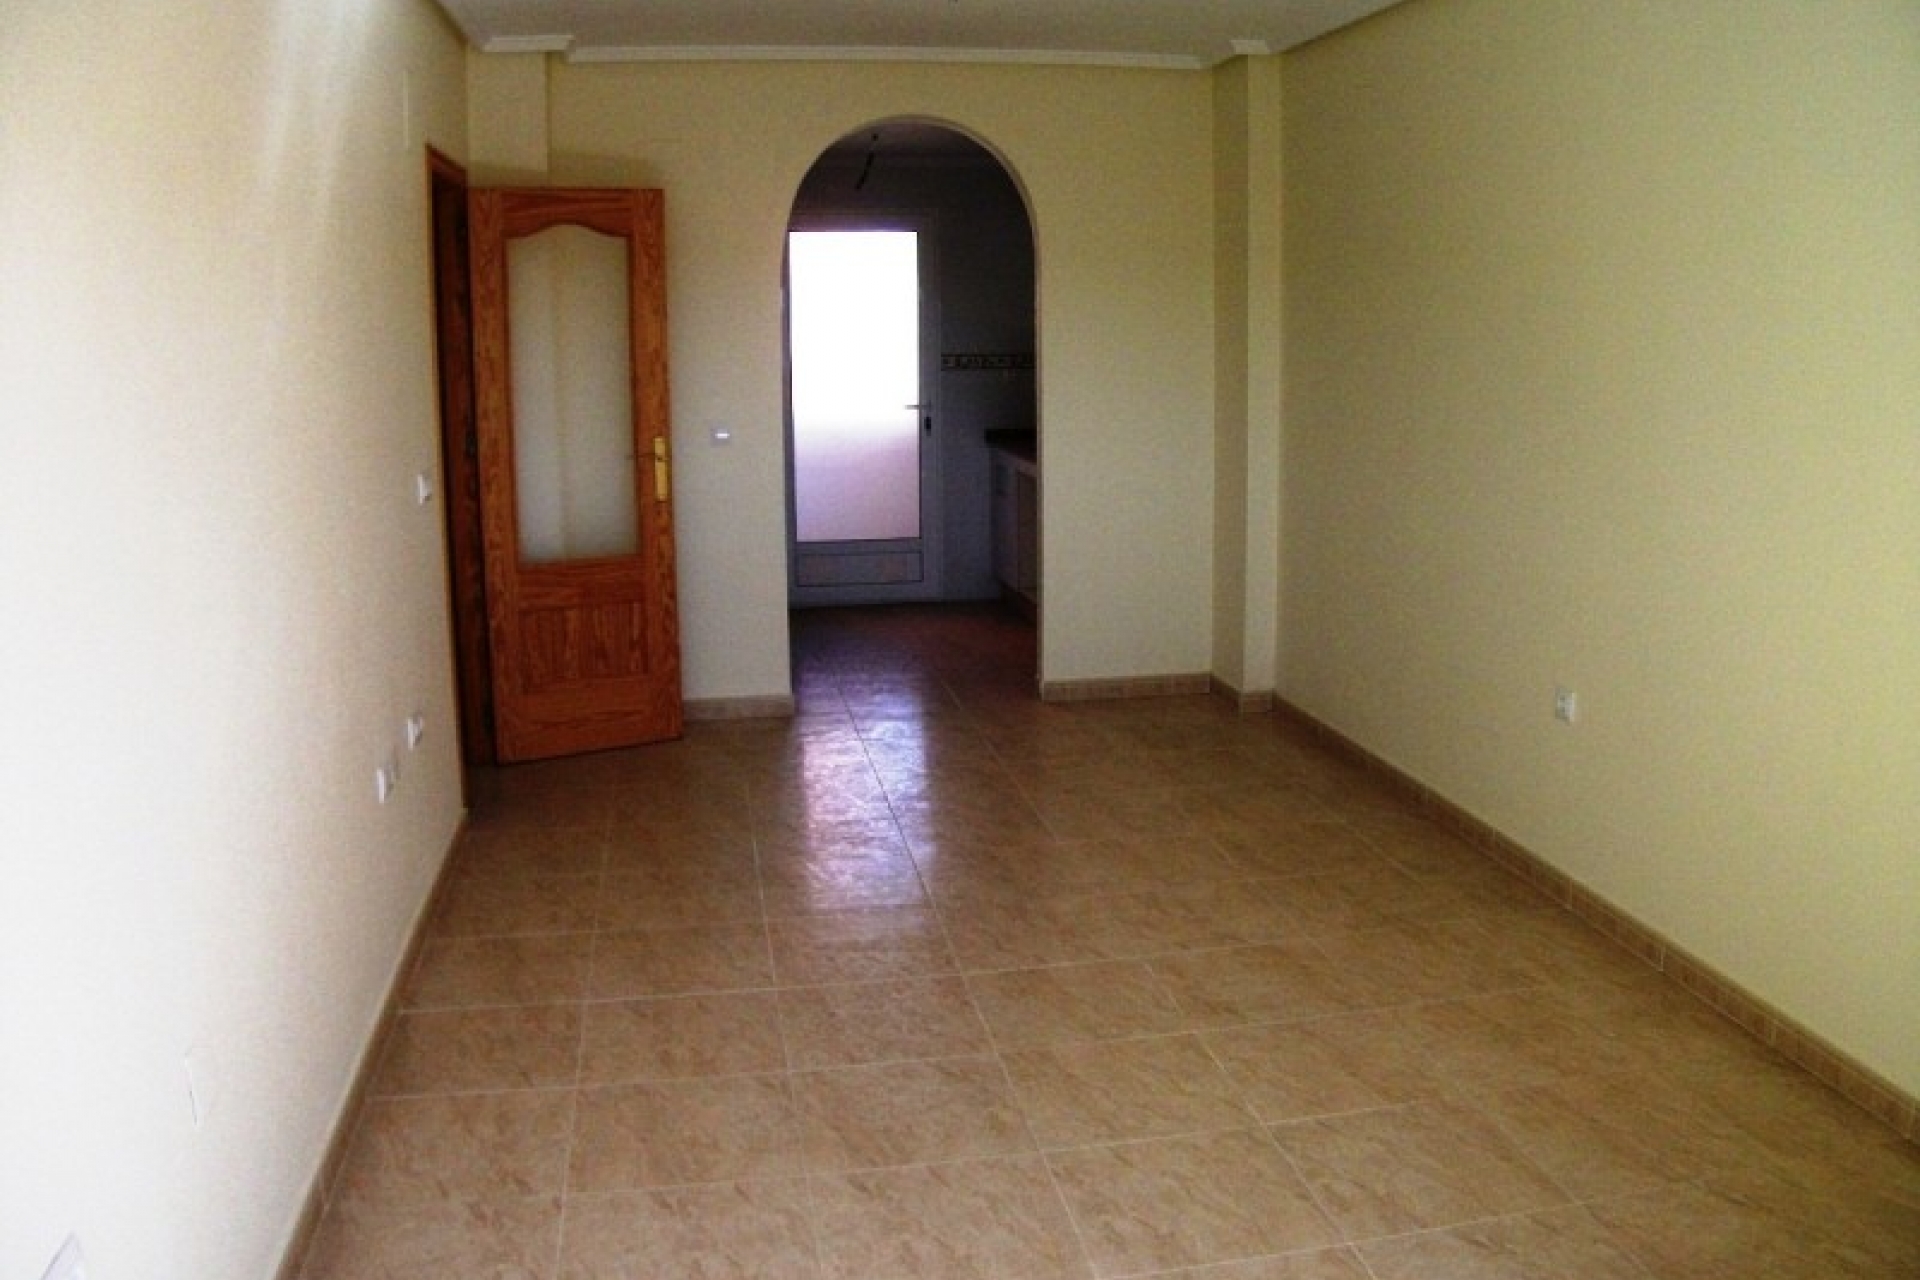 San Luis property for sale, cheap bargain property in San Miguel near Los Montesinos and Torrevieja, Costa Blanca, Spain